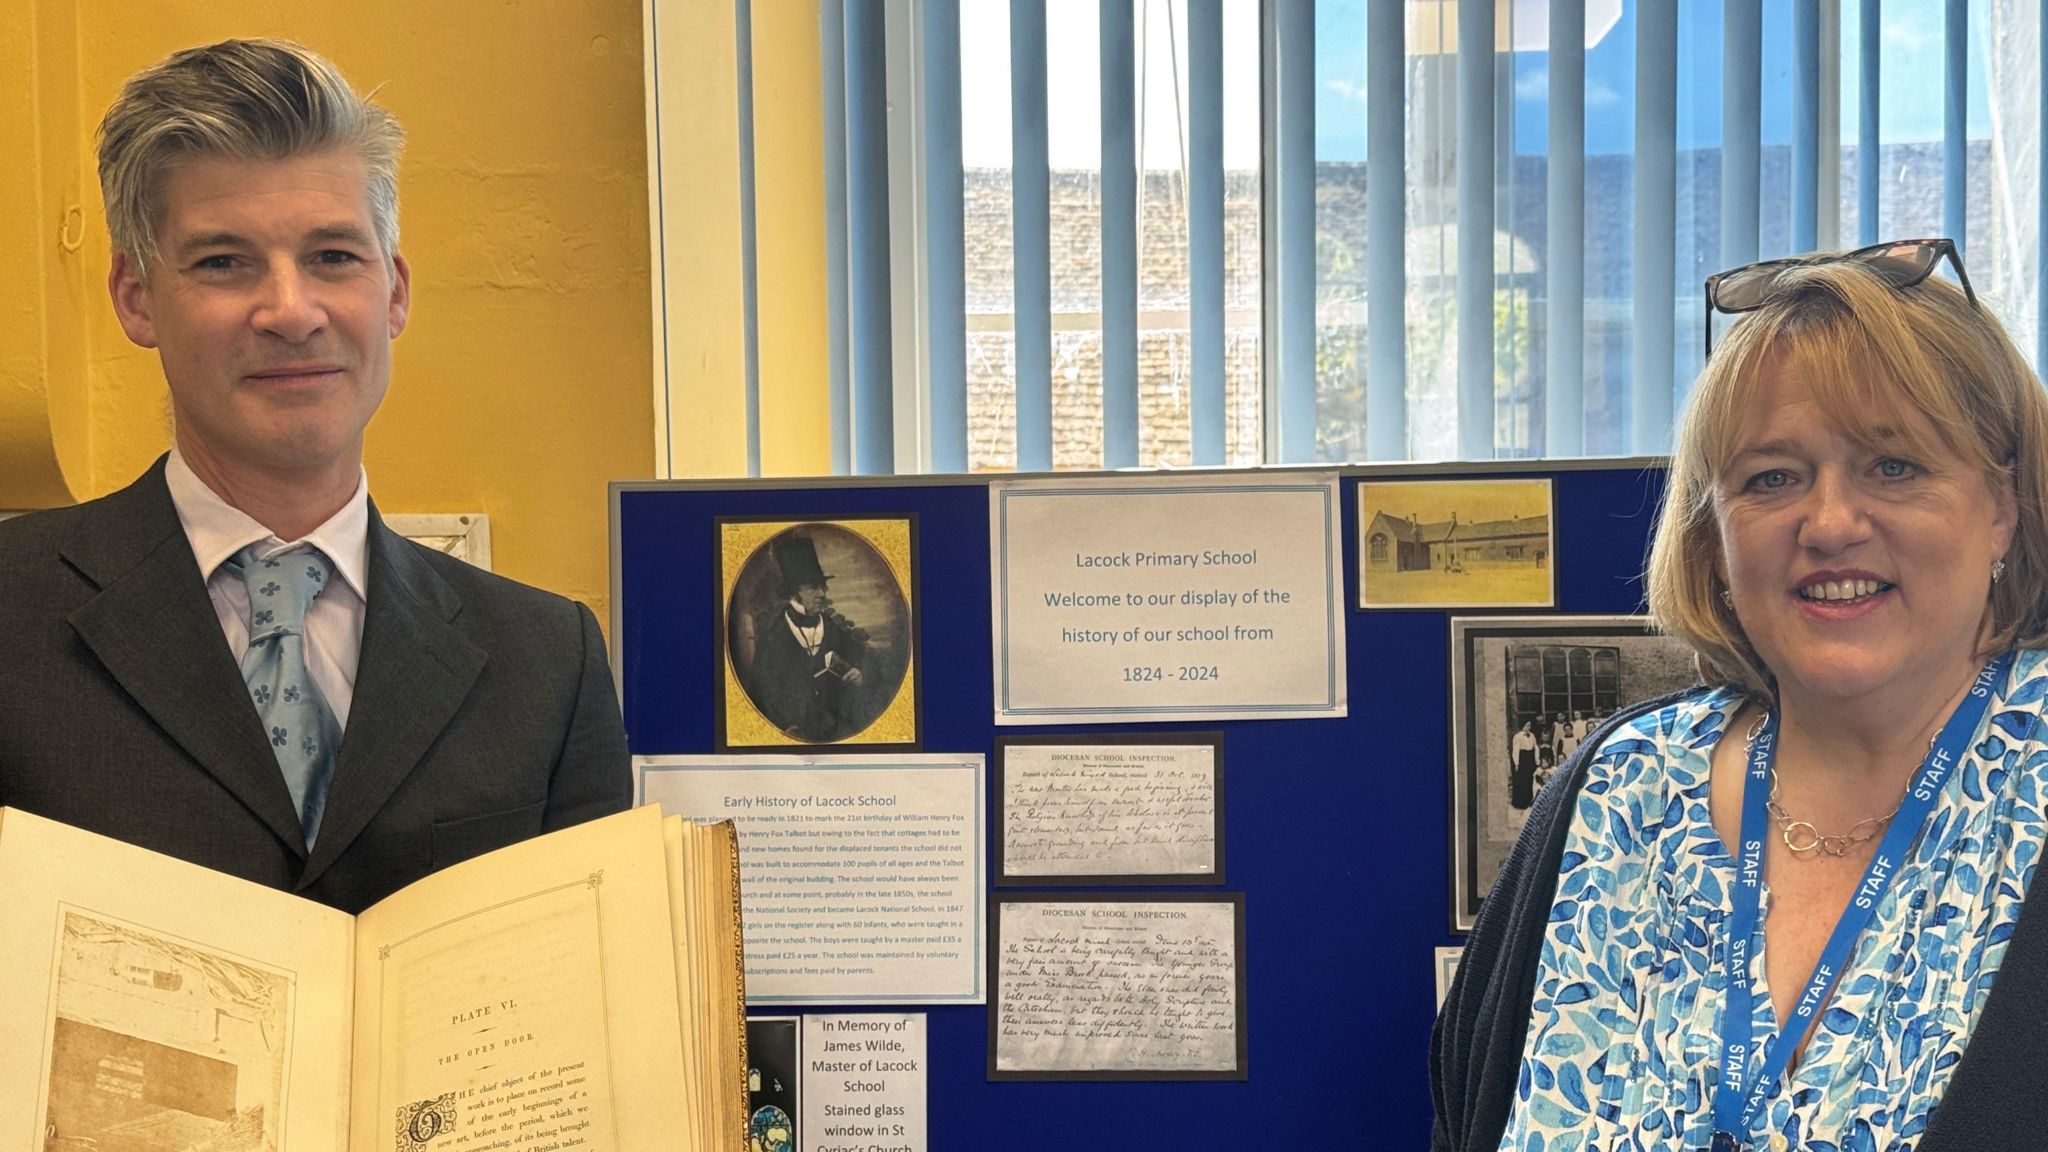 Revered James Clark-Maxwell holding a book while standing next to headteacher Caroline Jackson in front of an exhibition board at Lacock Primary School